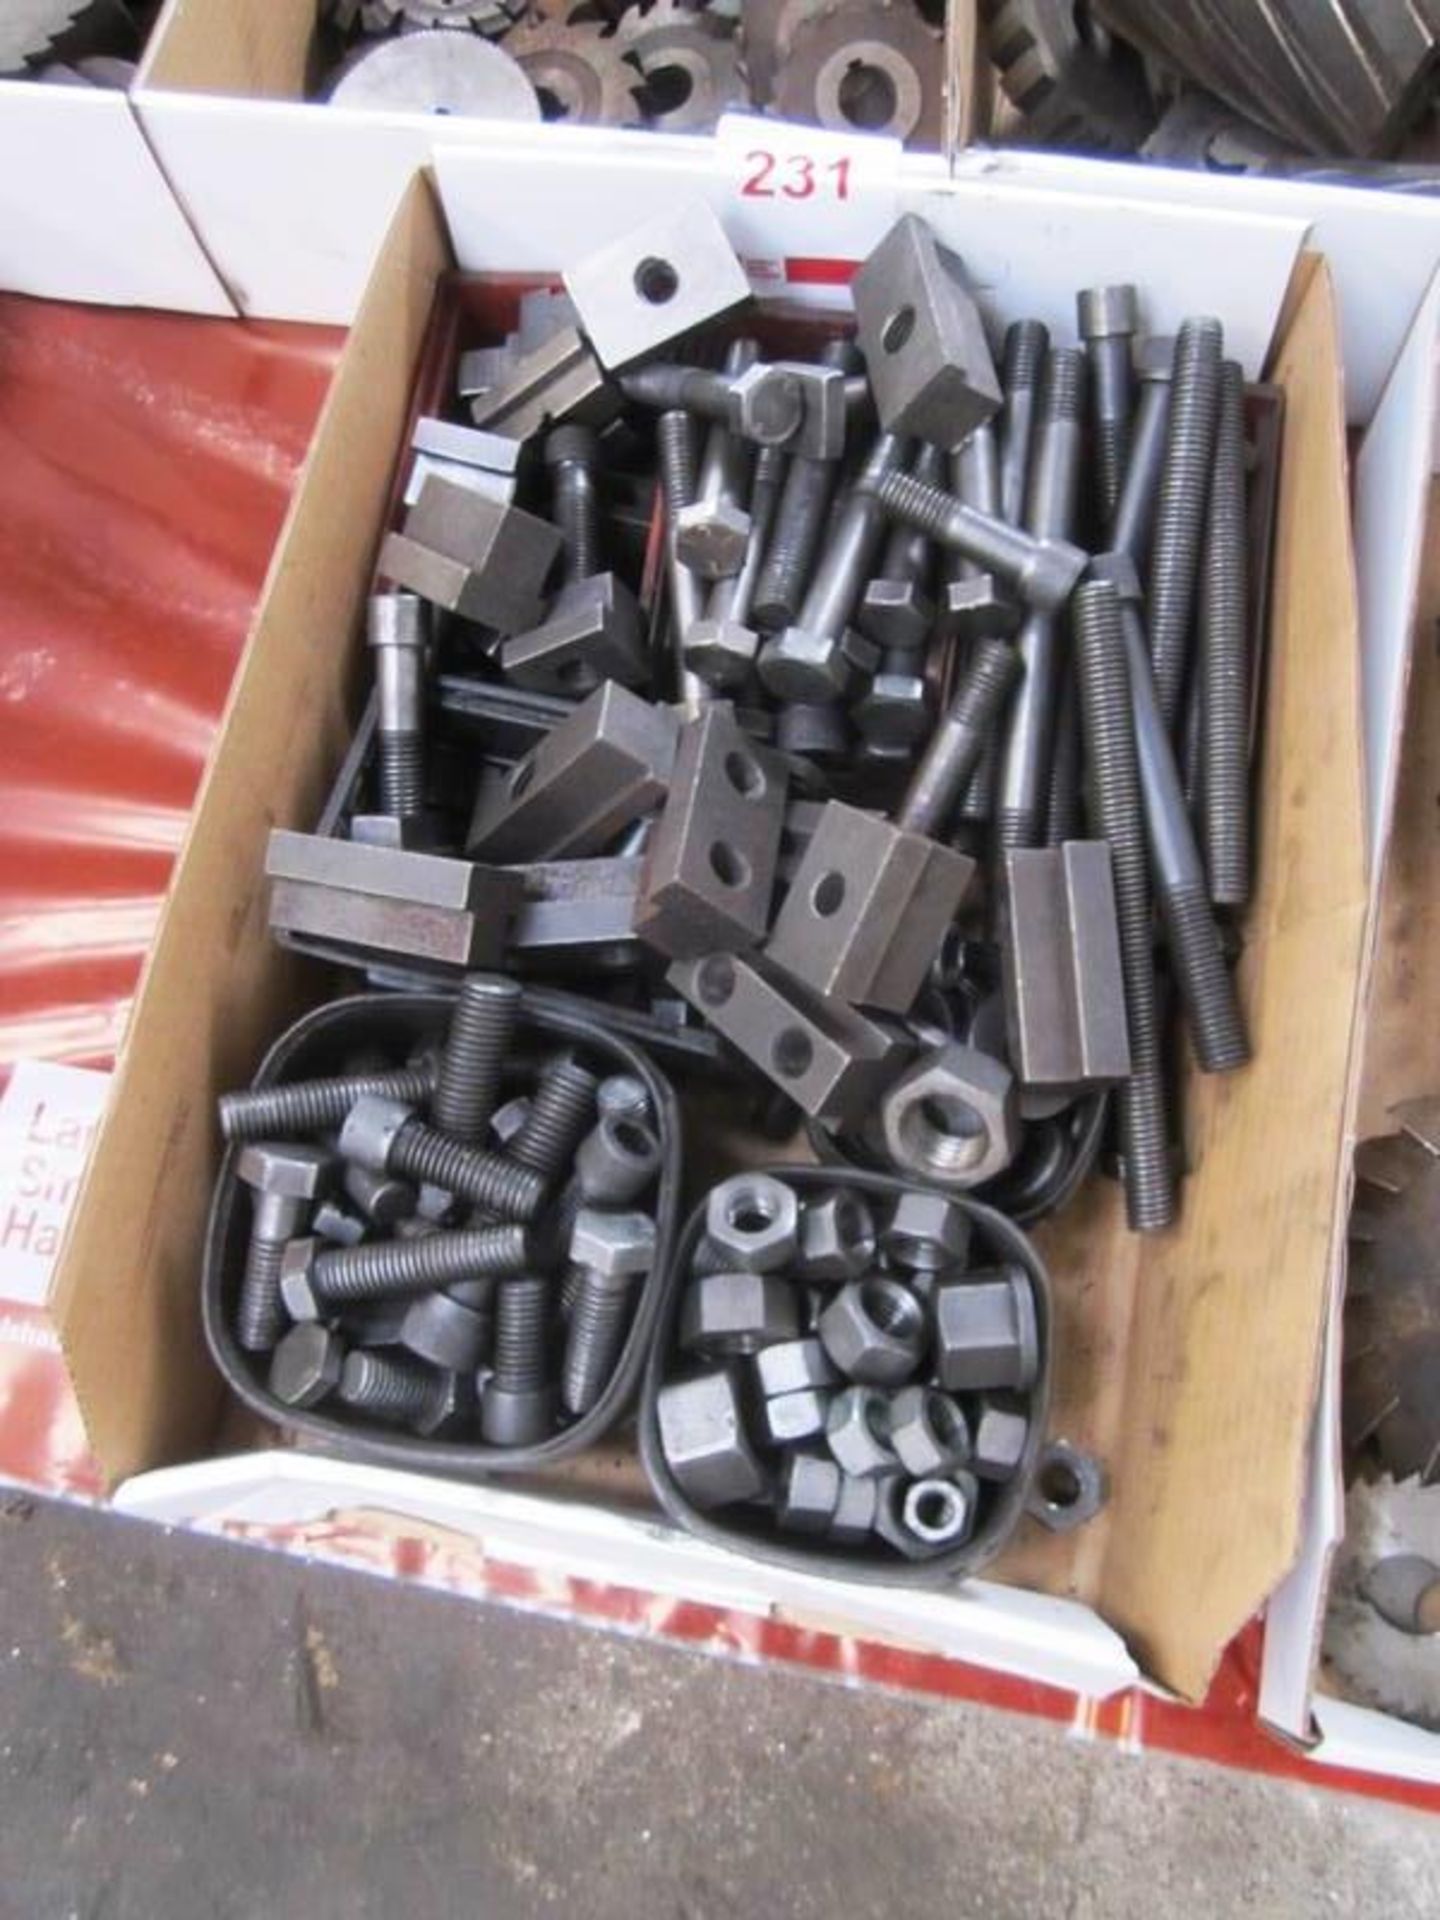 Box and contents to incl. various clamping nuts/bolts, etc. (Recommended collection period for